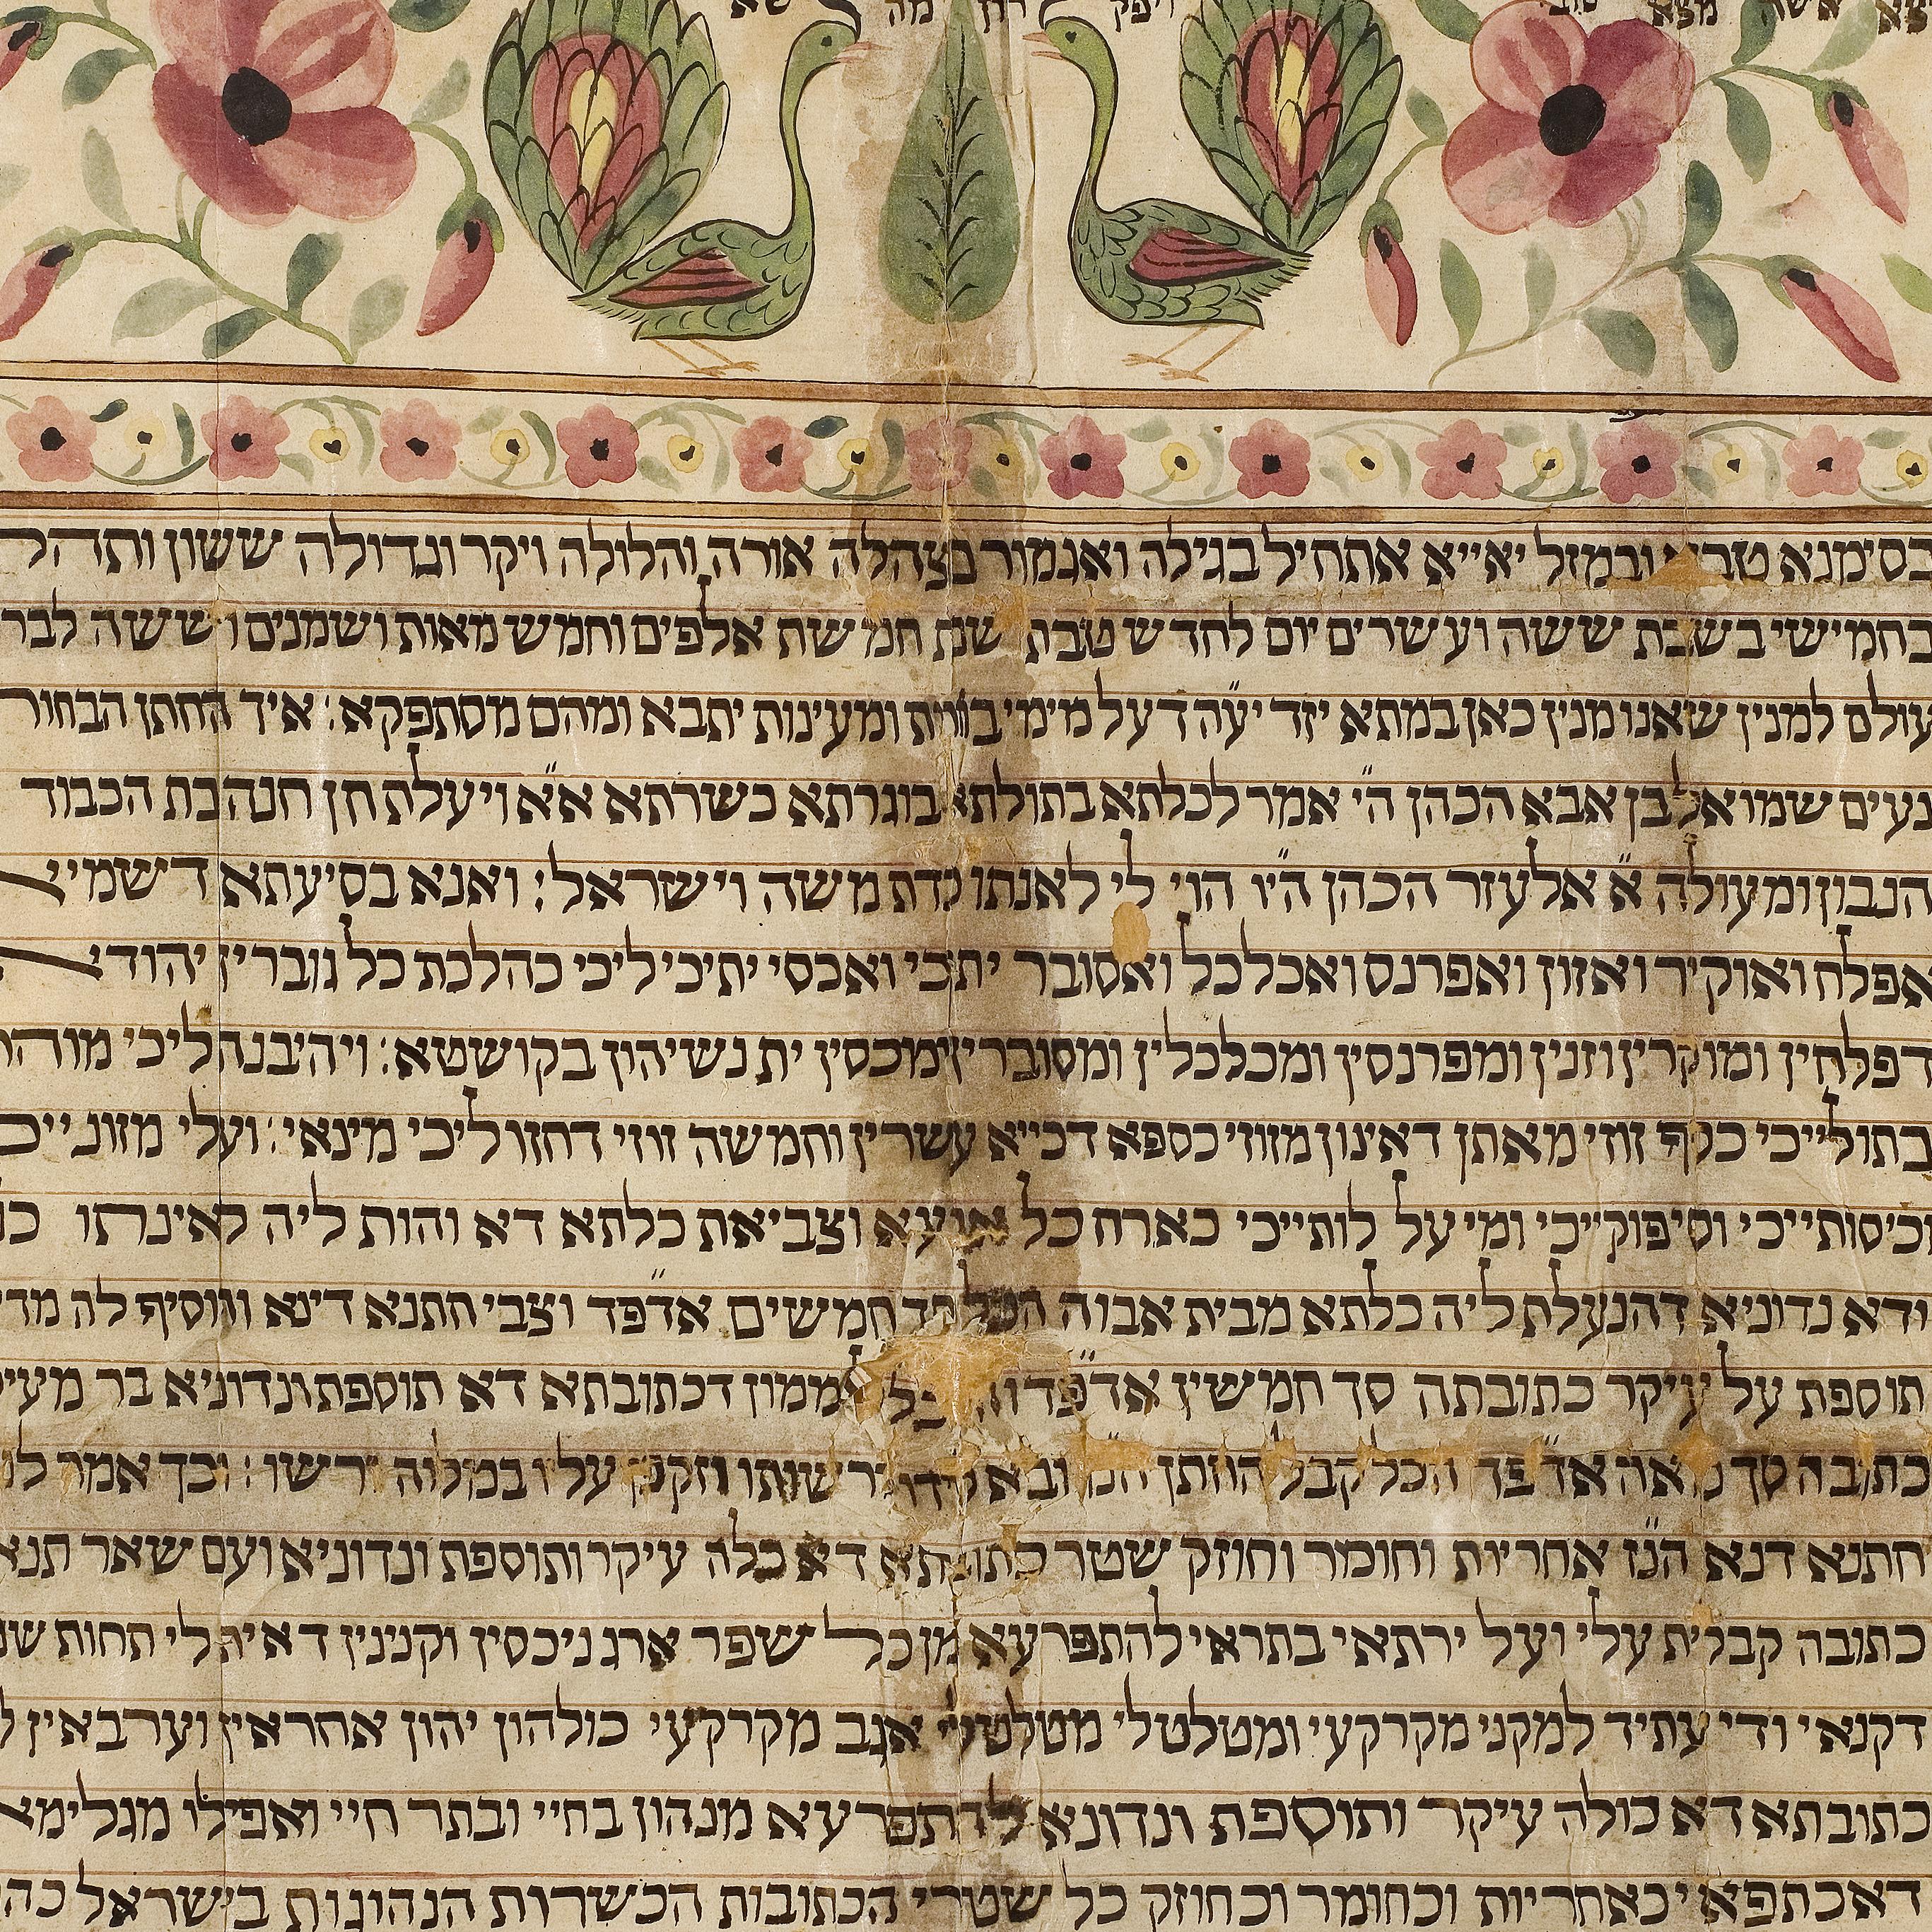 Penn Alumni Gift of Historic Jewish Marriage Contracts to Penn’s Judaica Collections